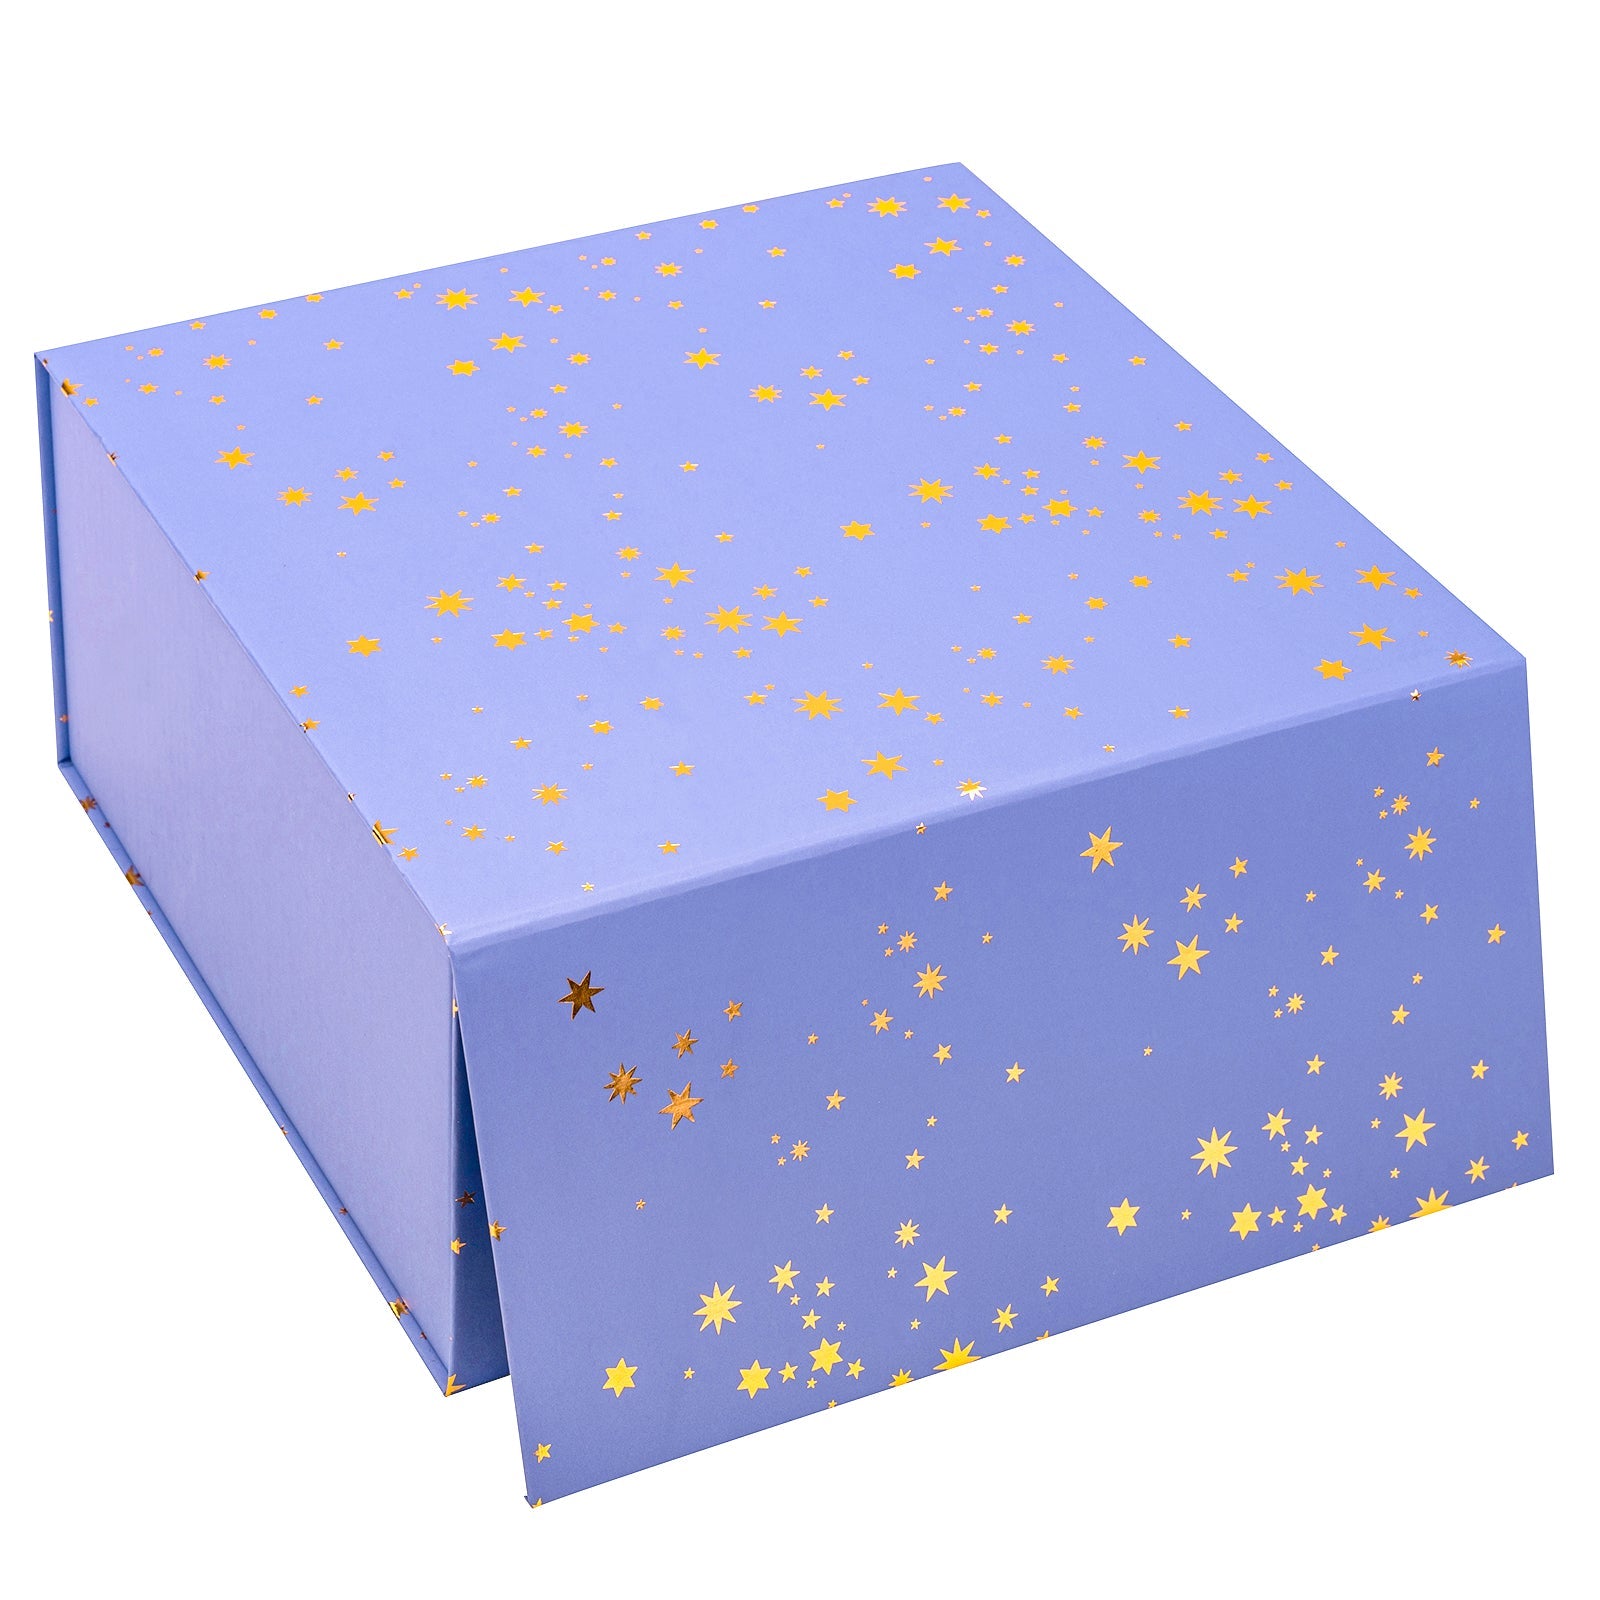 8x8x4 inch Magnetic Closure Box Scattered Stars on Violet